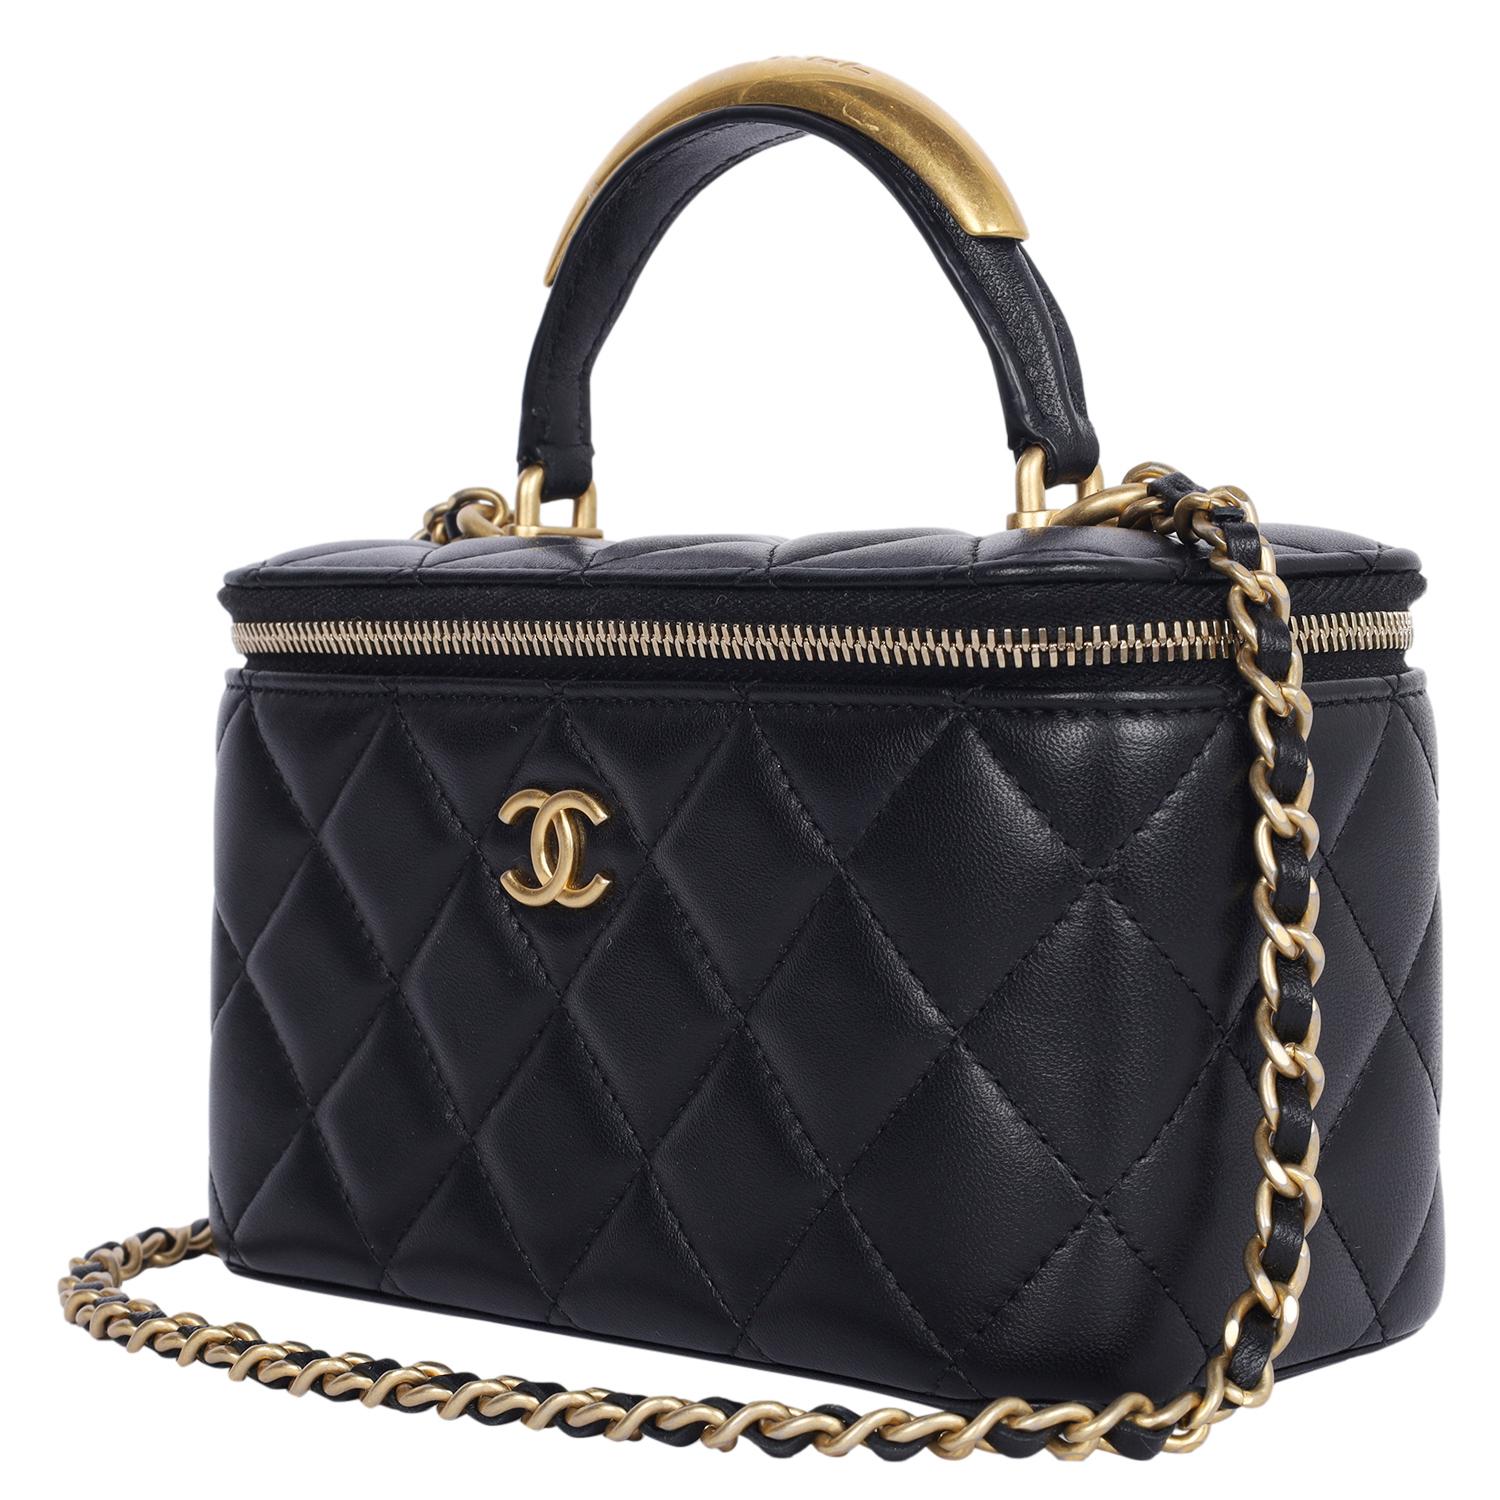 Chanel Lambskin Quilted Small Top Handle Vanity Case Black Crossbody Bag 3